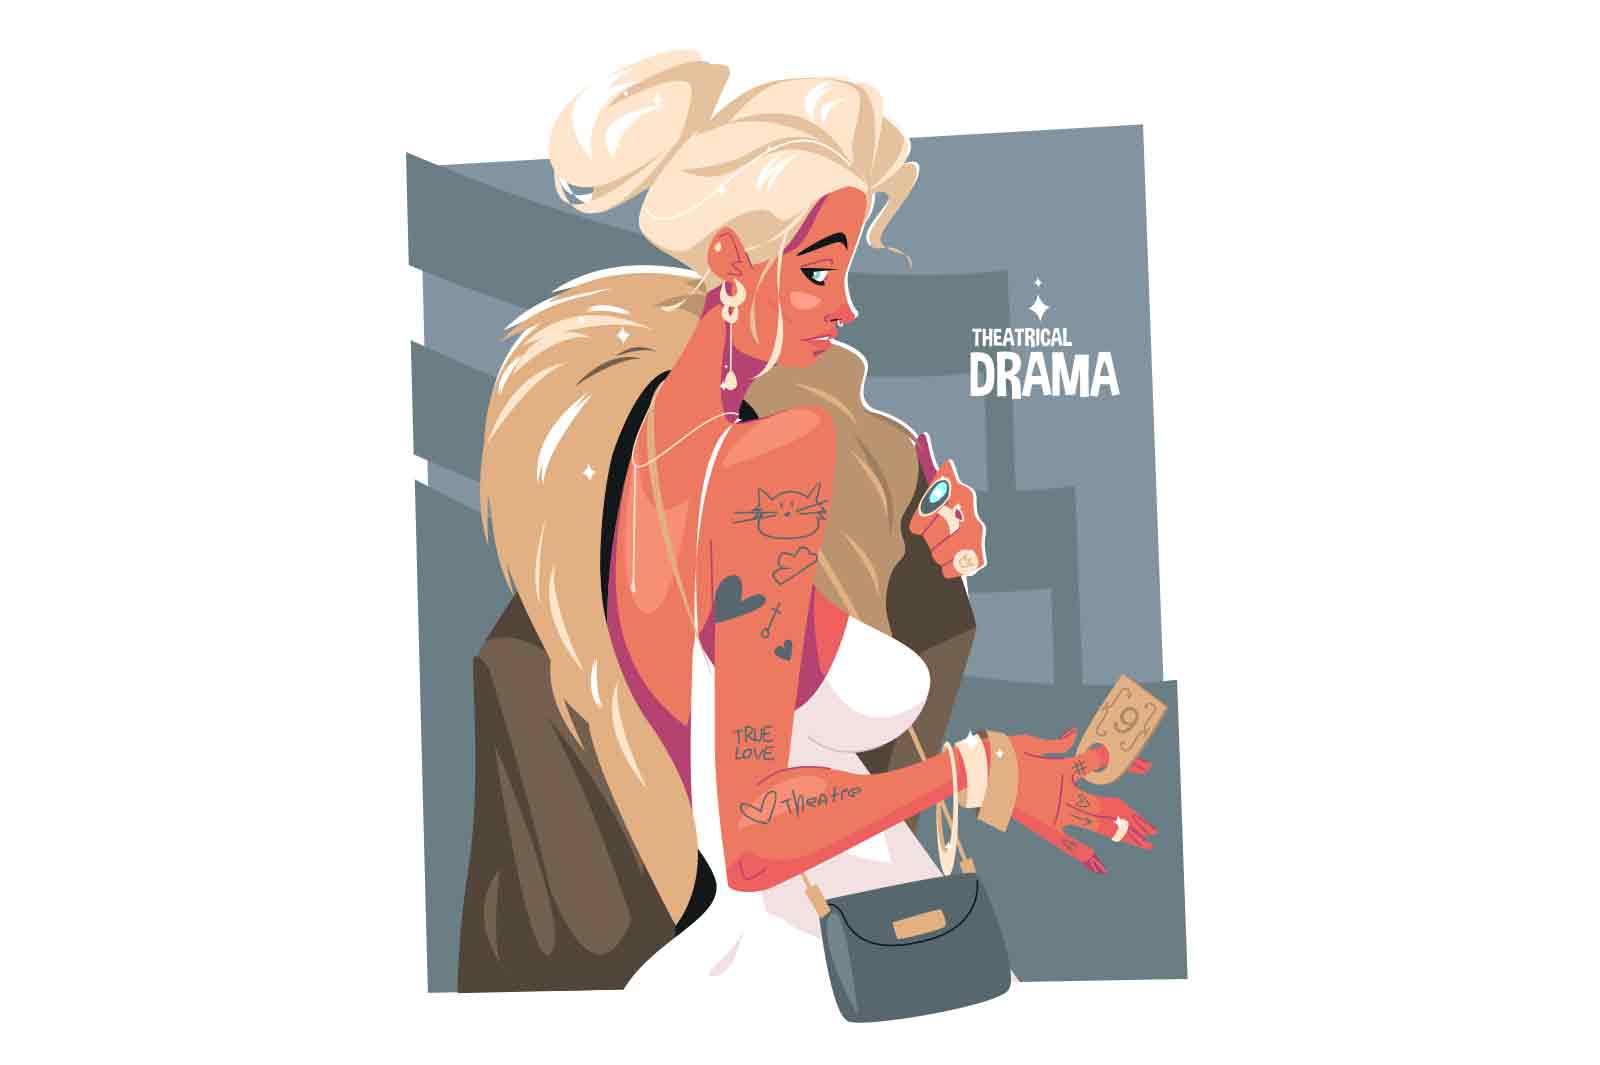 Cute woman in theatre vector illustration. Stylish girl in fashionable dress holding fur coat. Theatrical drama and entertainment flat style concept